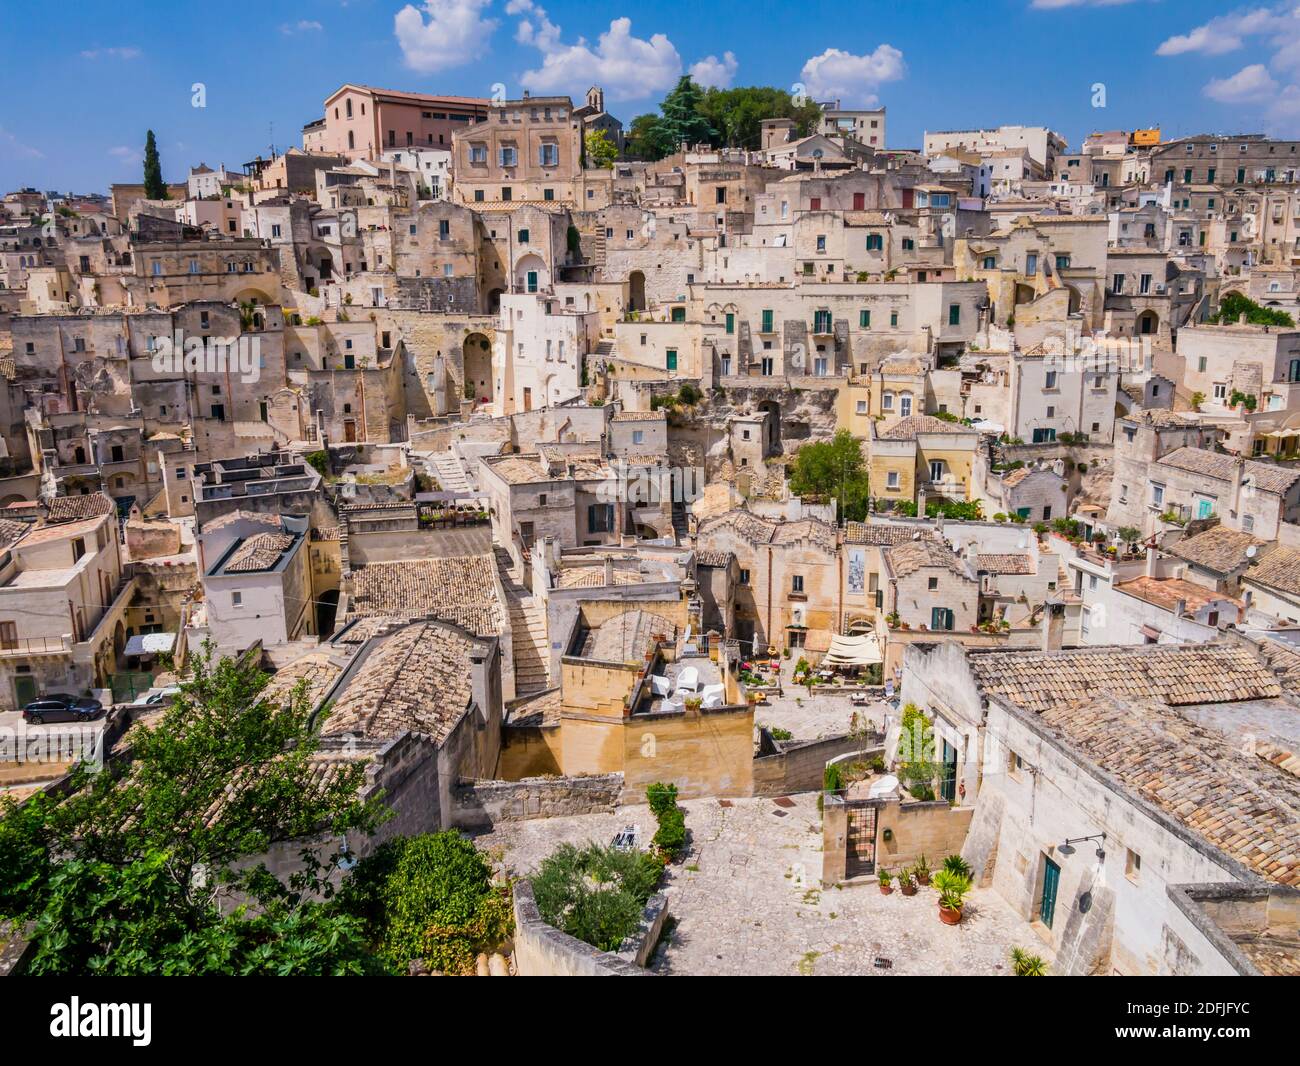 Stunning view of Sasso Barisano district and its characteristic cave dwellings in the ancient town of Matera, Basilicata region, southern Italy Stock Photo